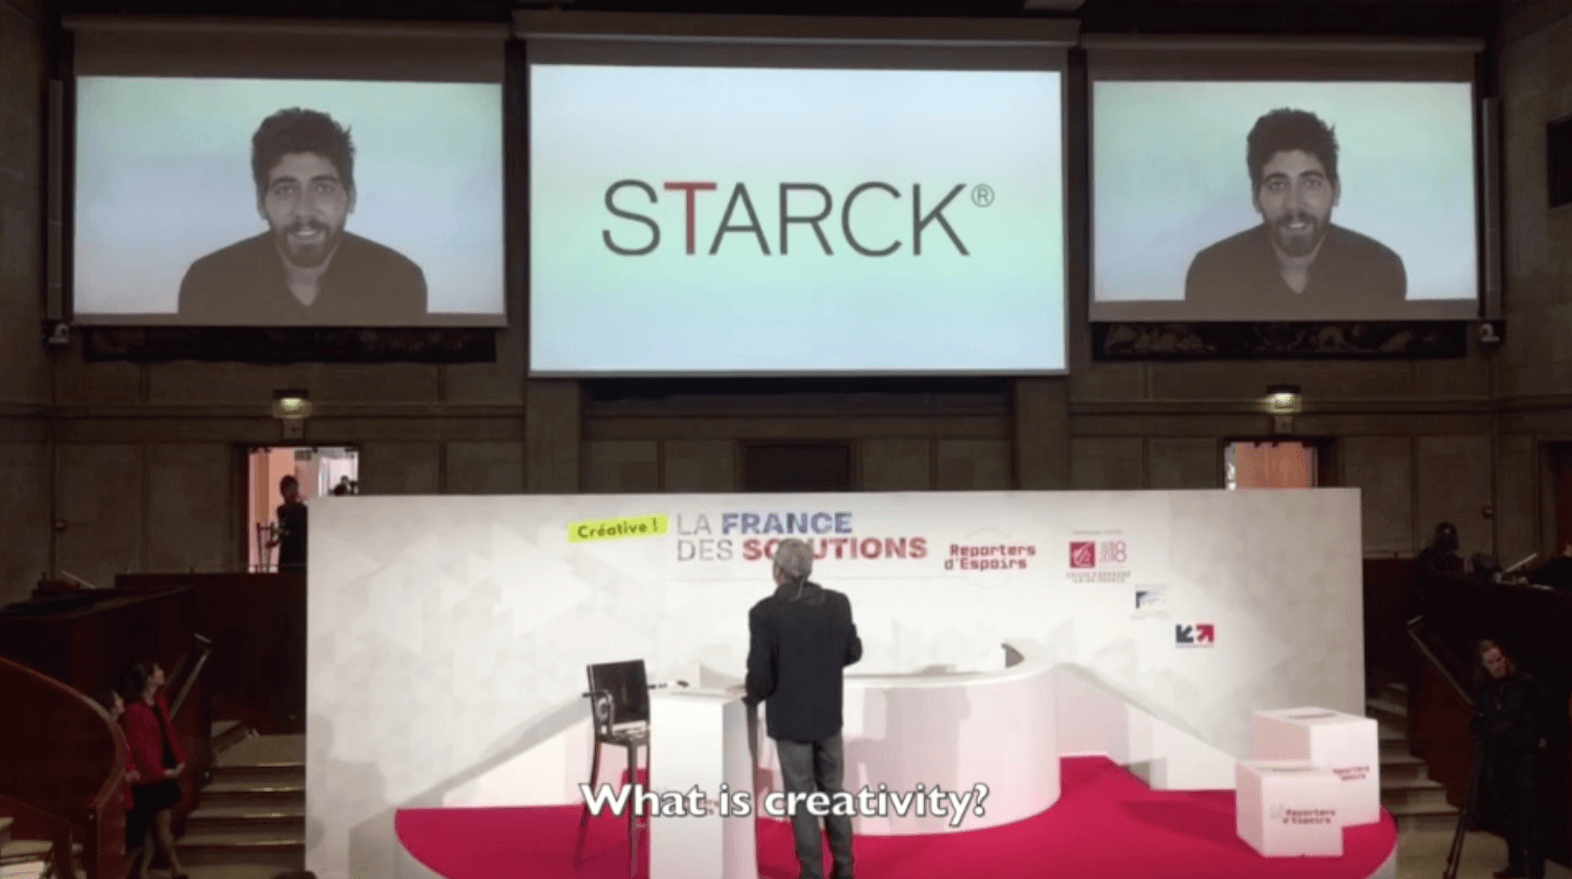 Philippe Starck presented a definition of creativity at La France des Solutions 2017 - 